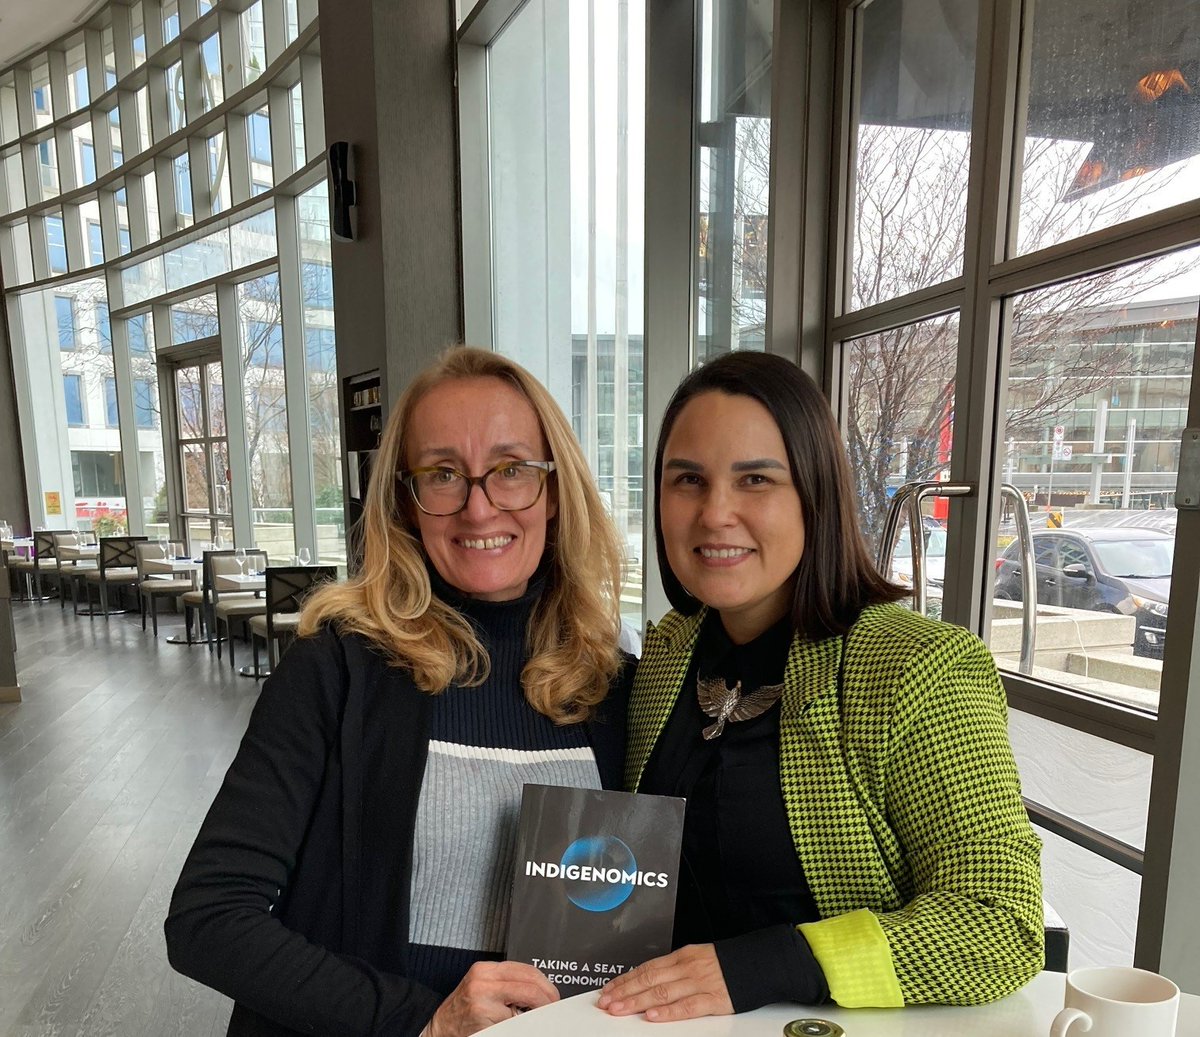 @Hesquiaht and I met in Vancouver to discuss OECD's new work programme on trade and Indigenous Peoples and potential for future collaboration. Some good groundwork has been laid by Carol Anne and others but much remains to be done! #indigenomics